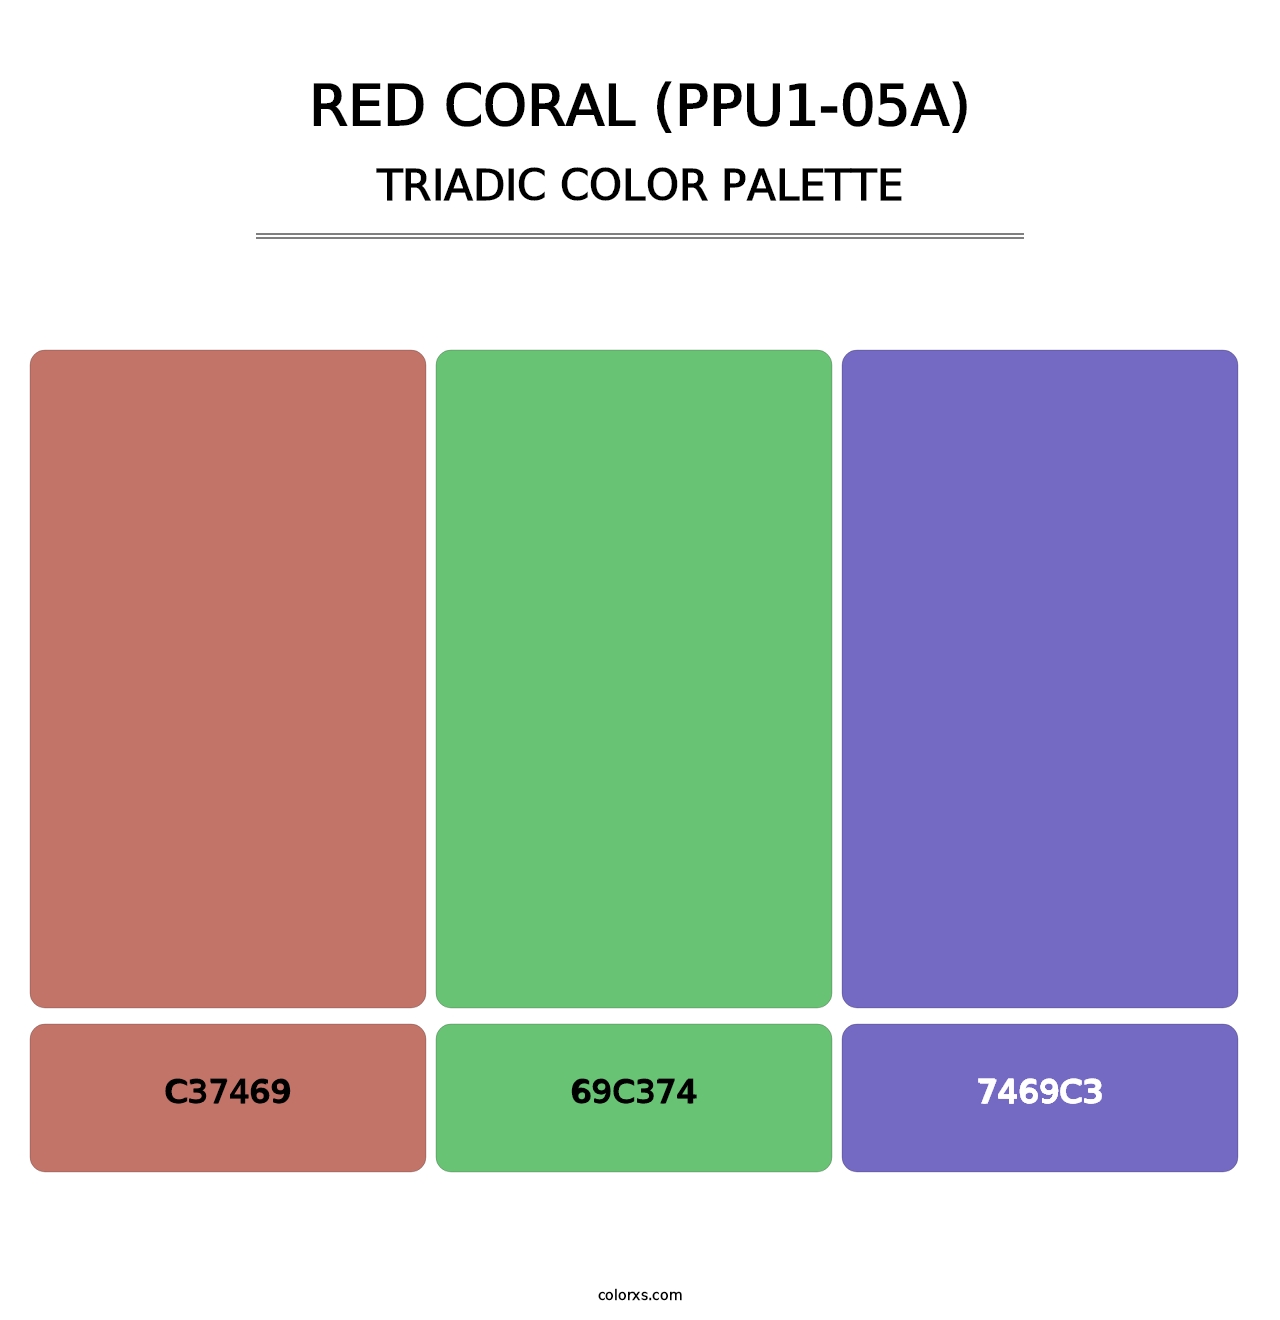 Red Coral (PPU1-05A) - Triadic Color Palette